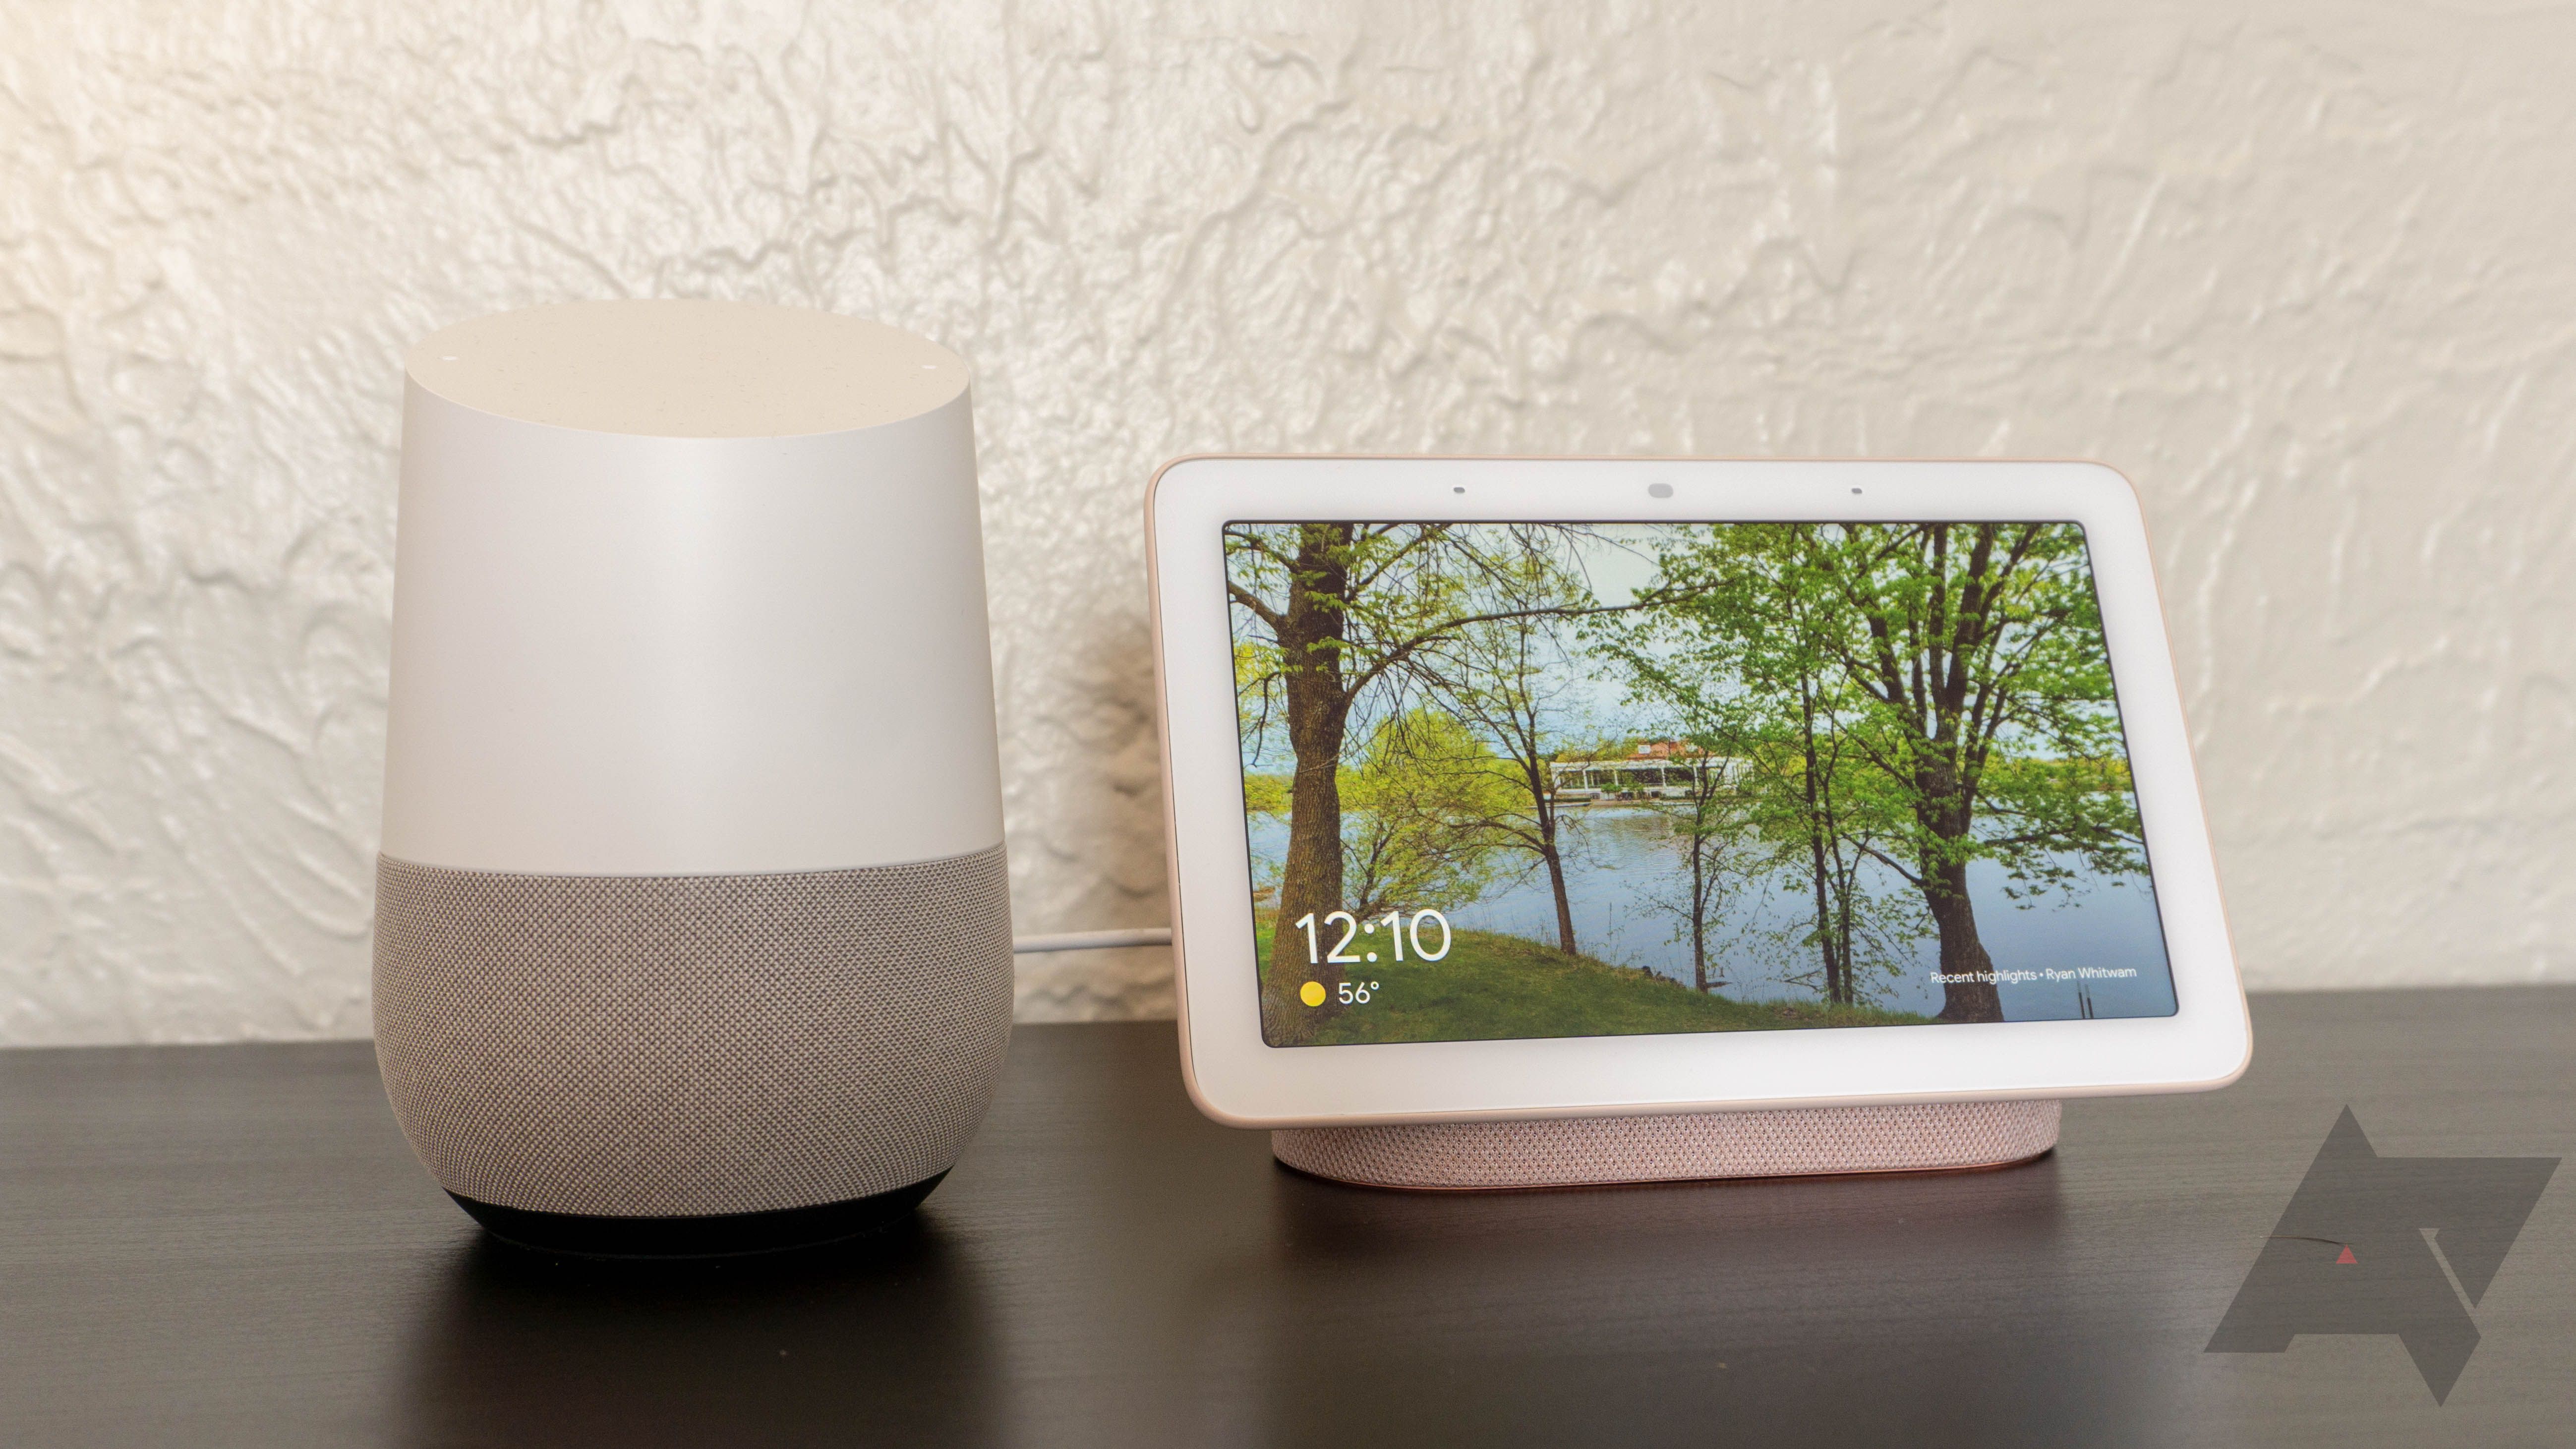 How factory reset your Google Home, Nest Mini, Nest Hub, or other Assistant device